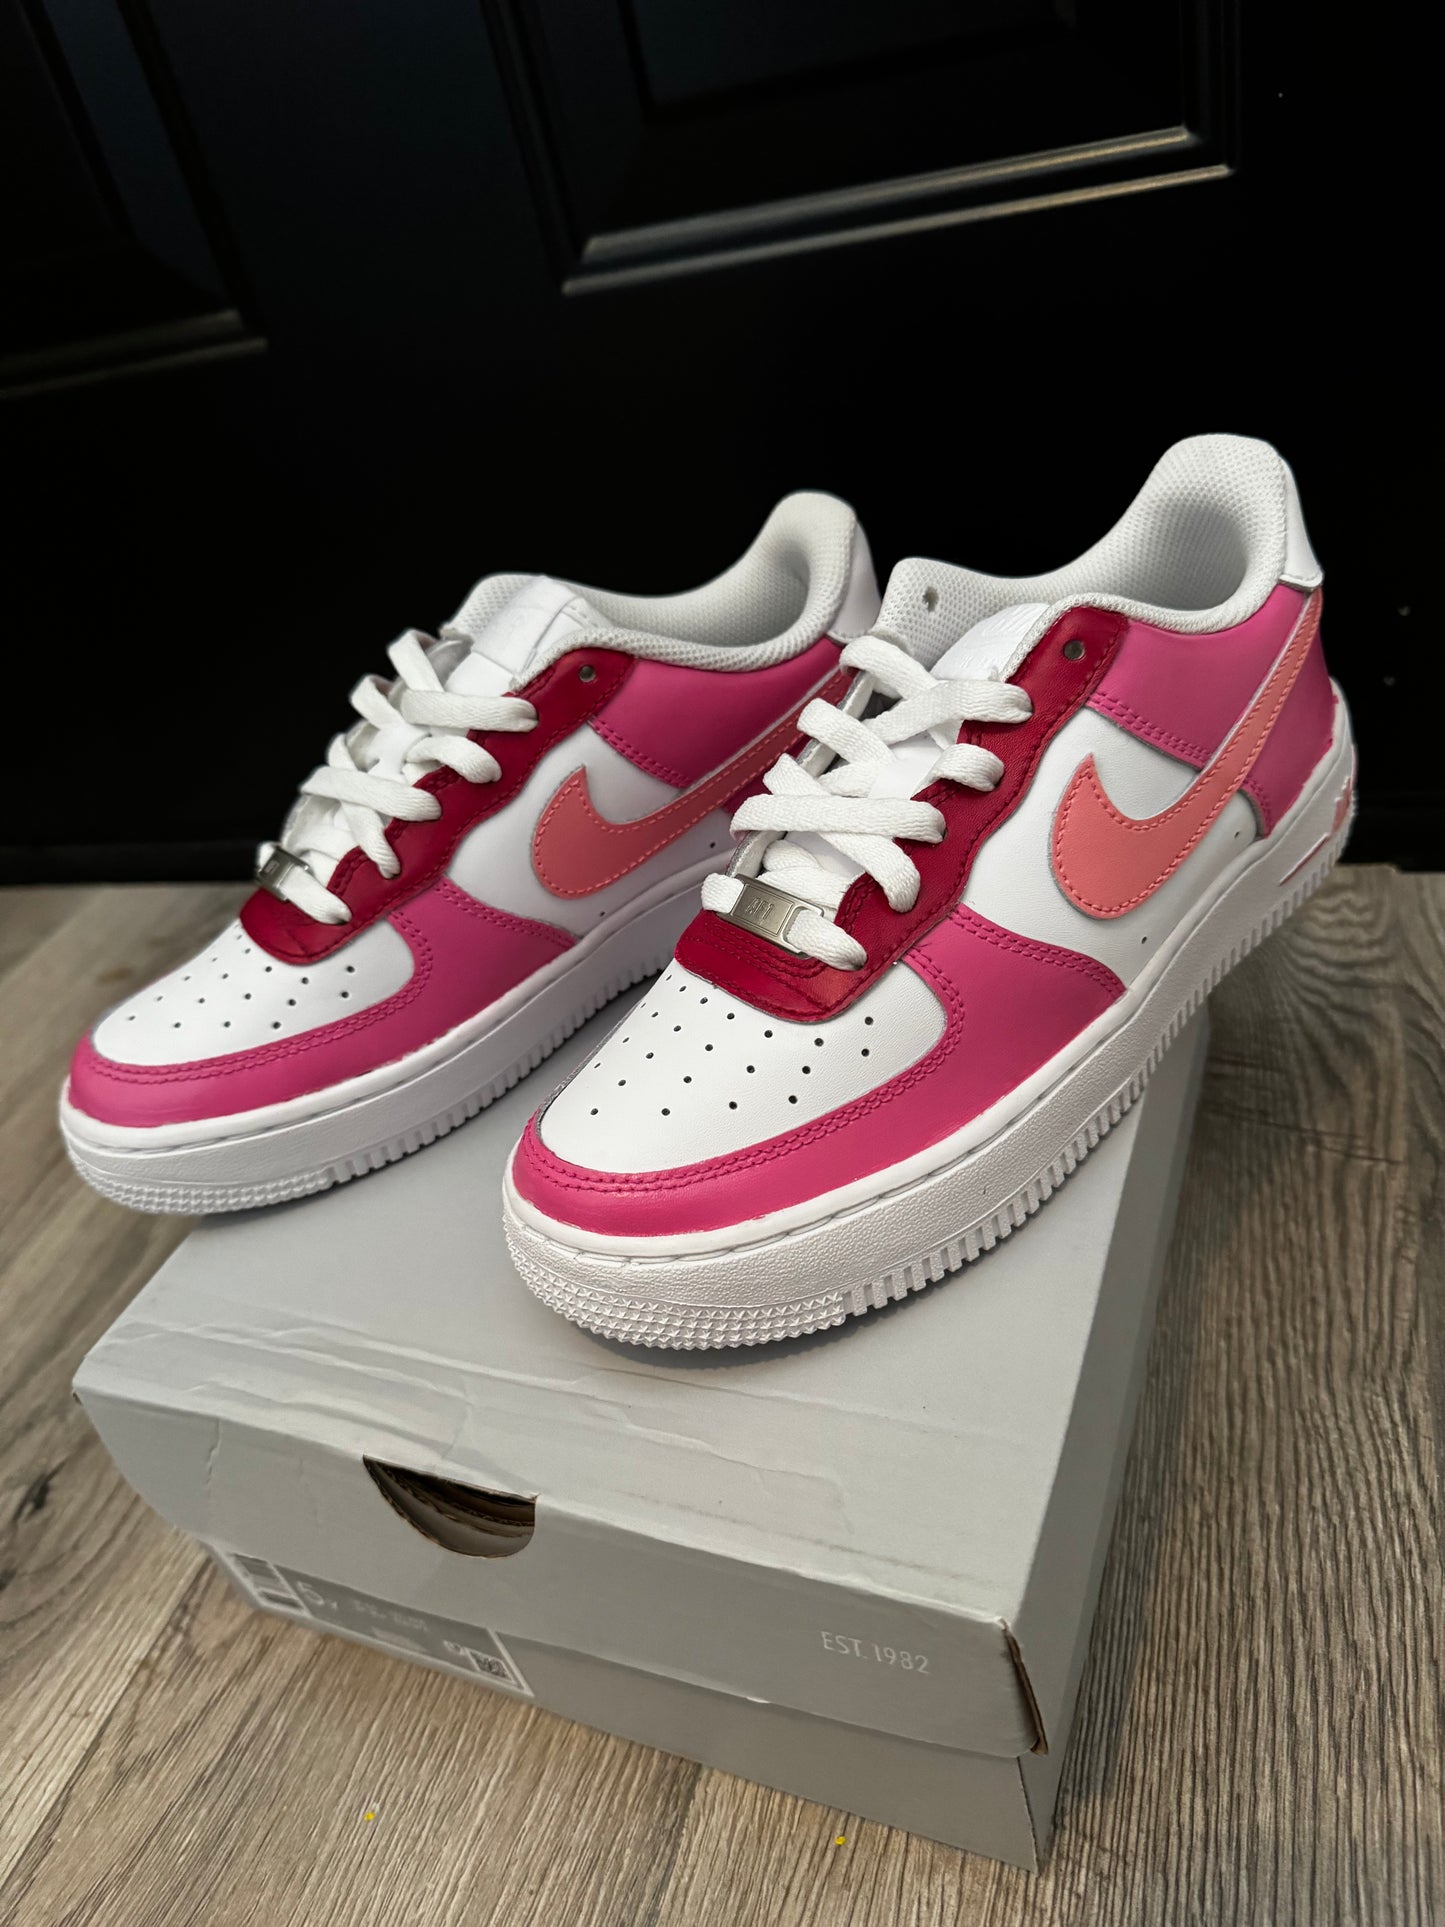 Valentine's Air Forces